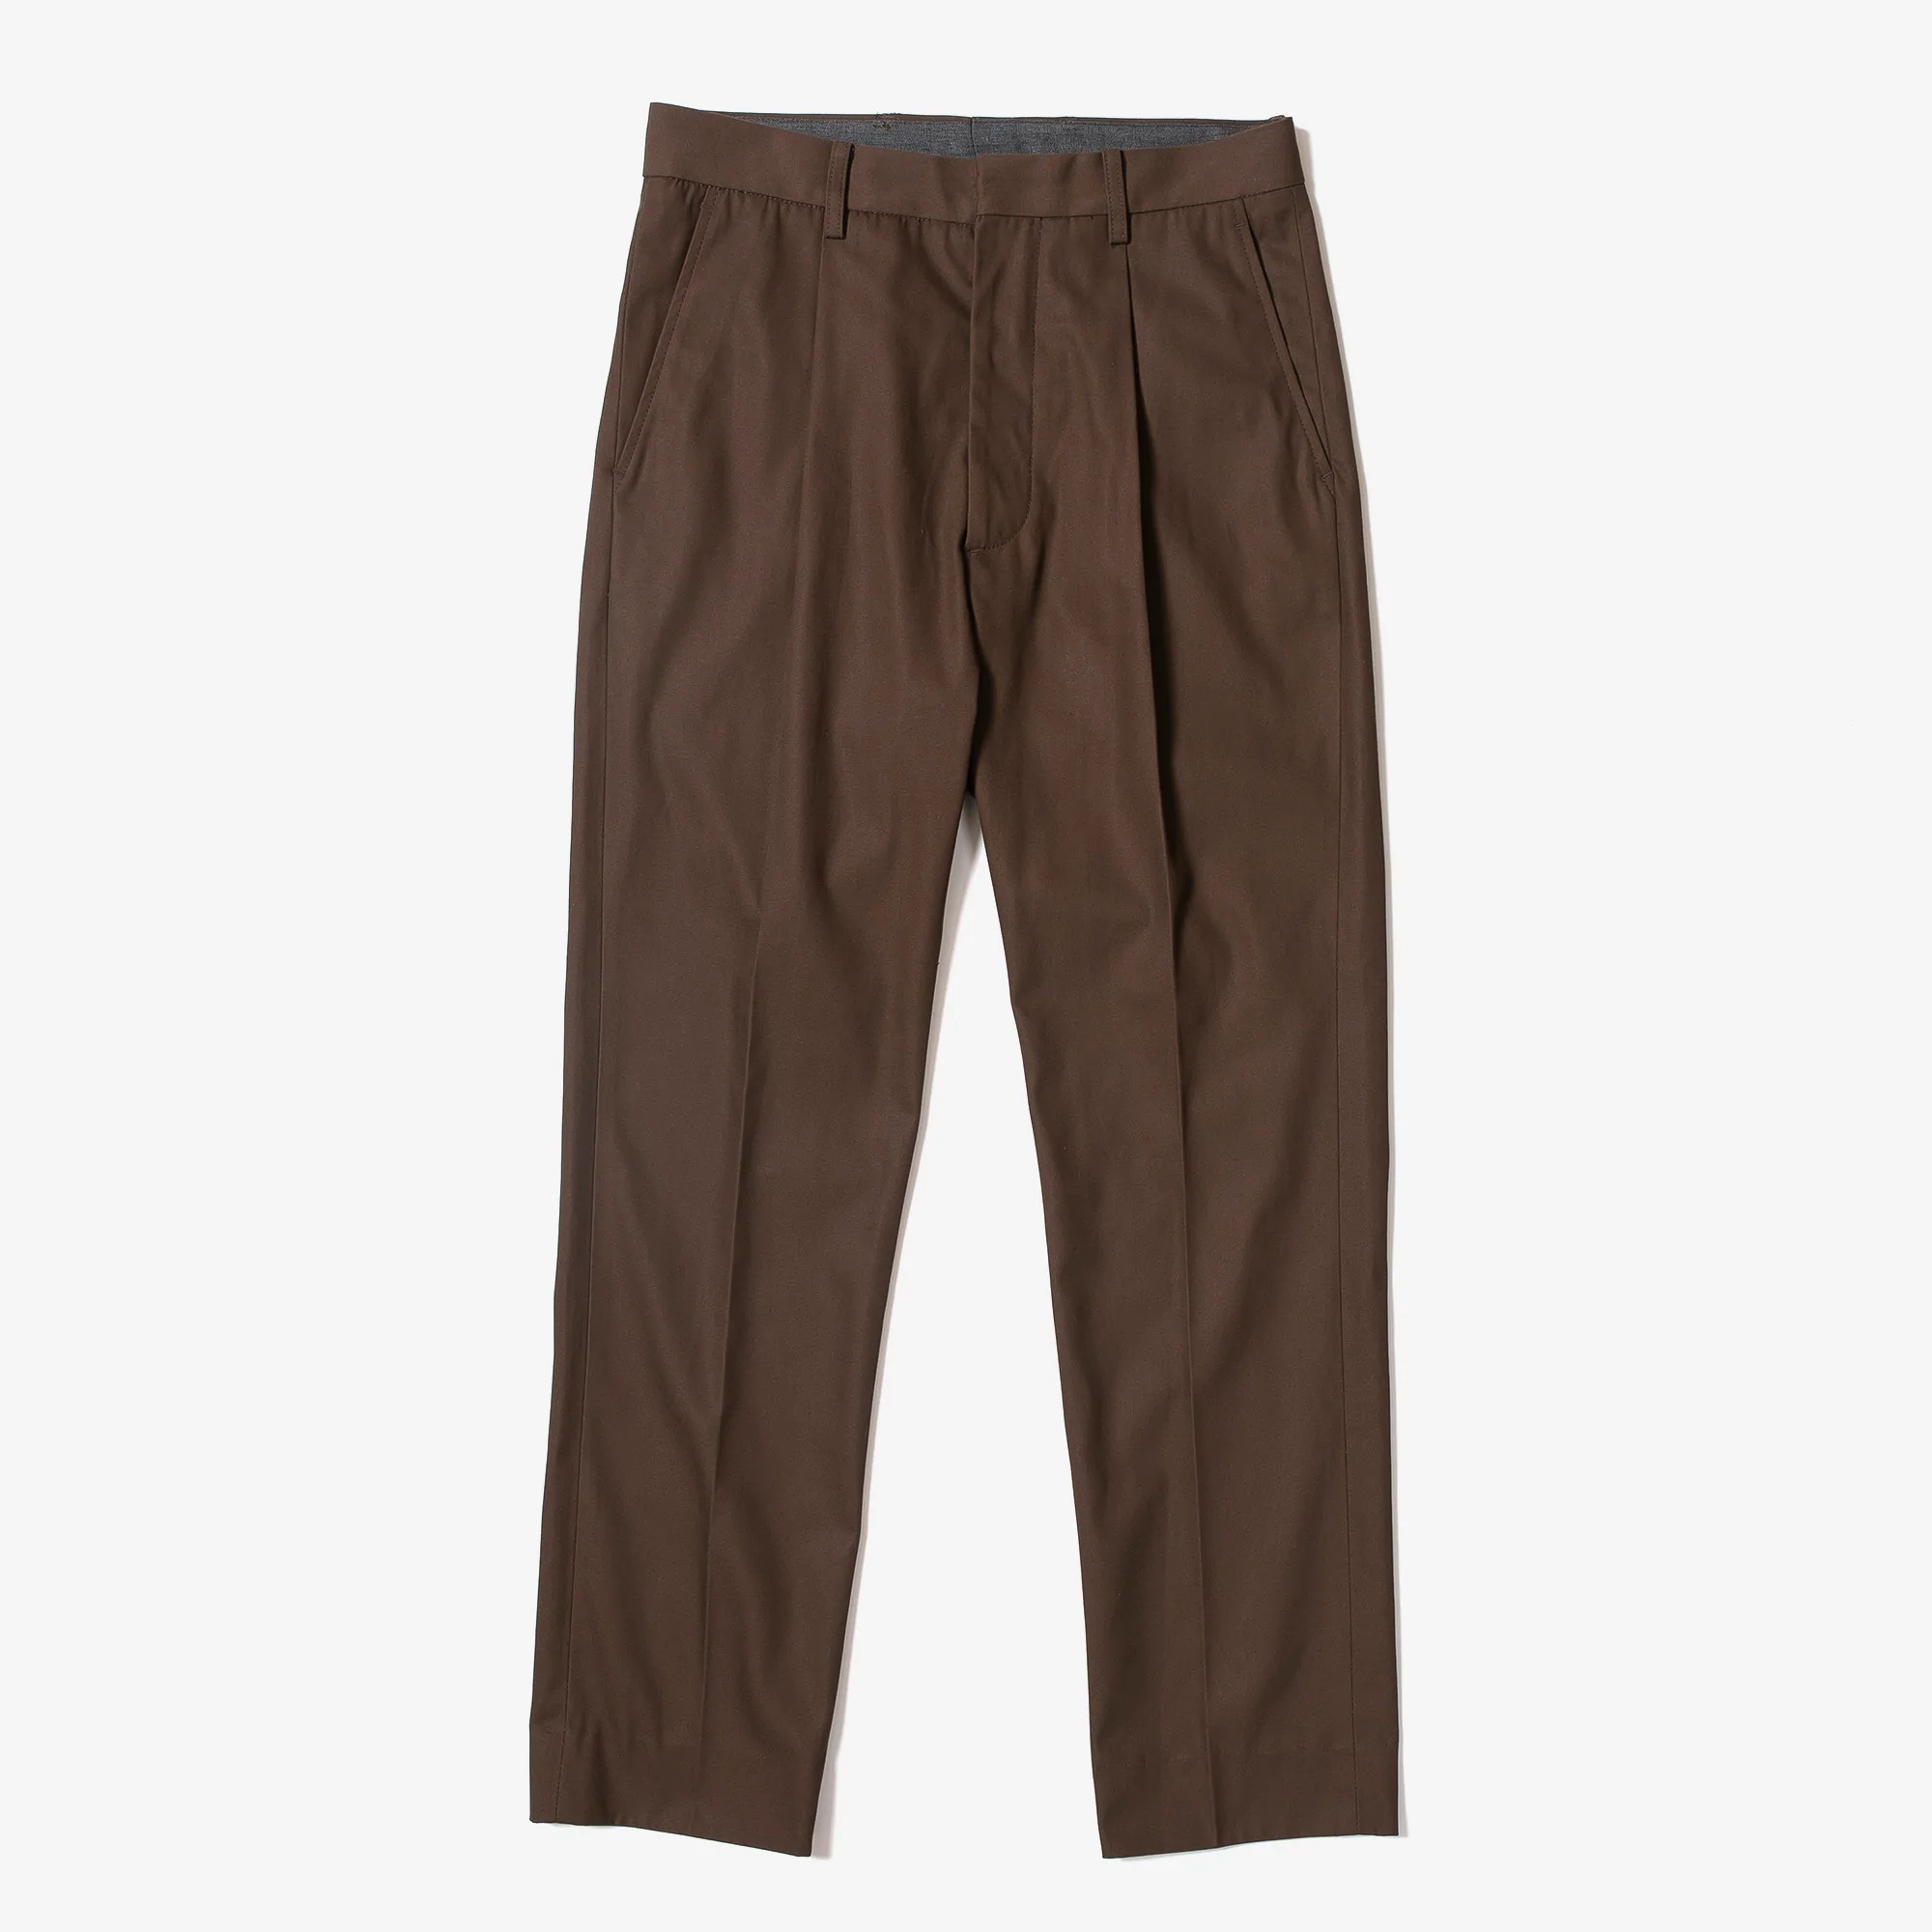 LOST CONTROL L22A3-3024 1 PLEATS TROUSERS BROWN